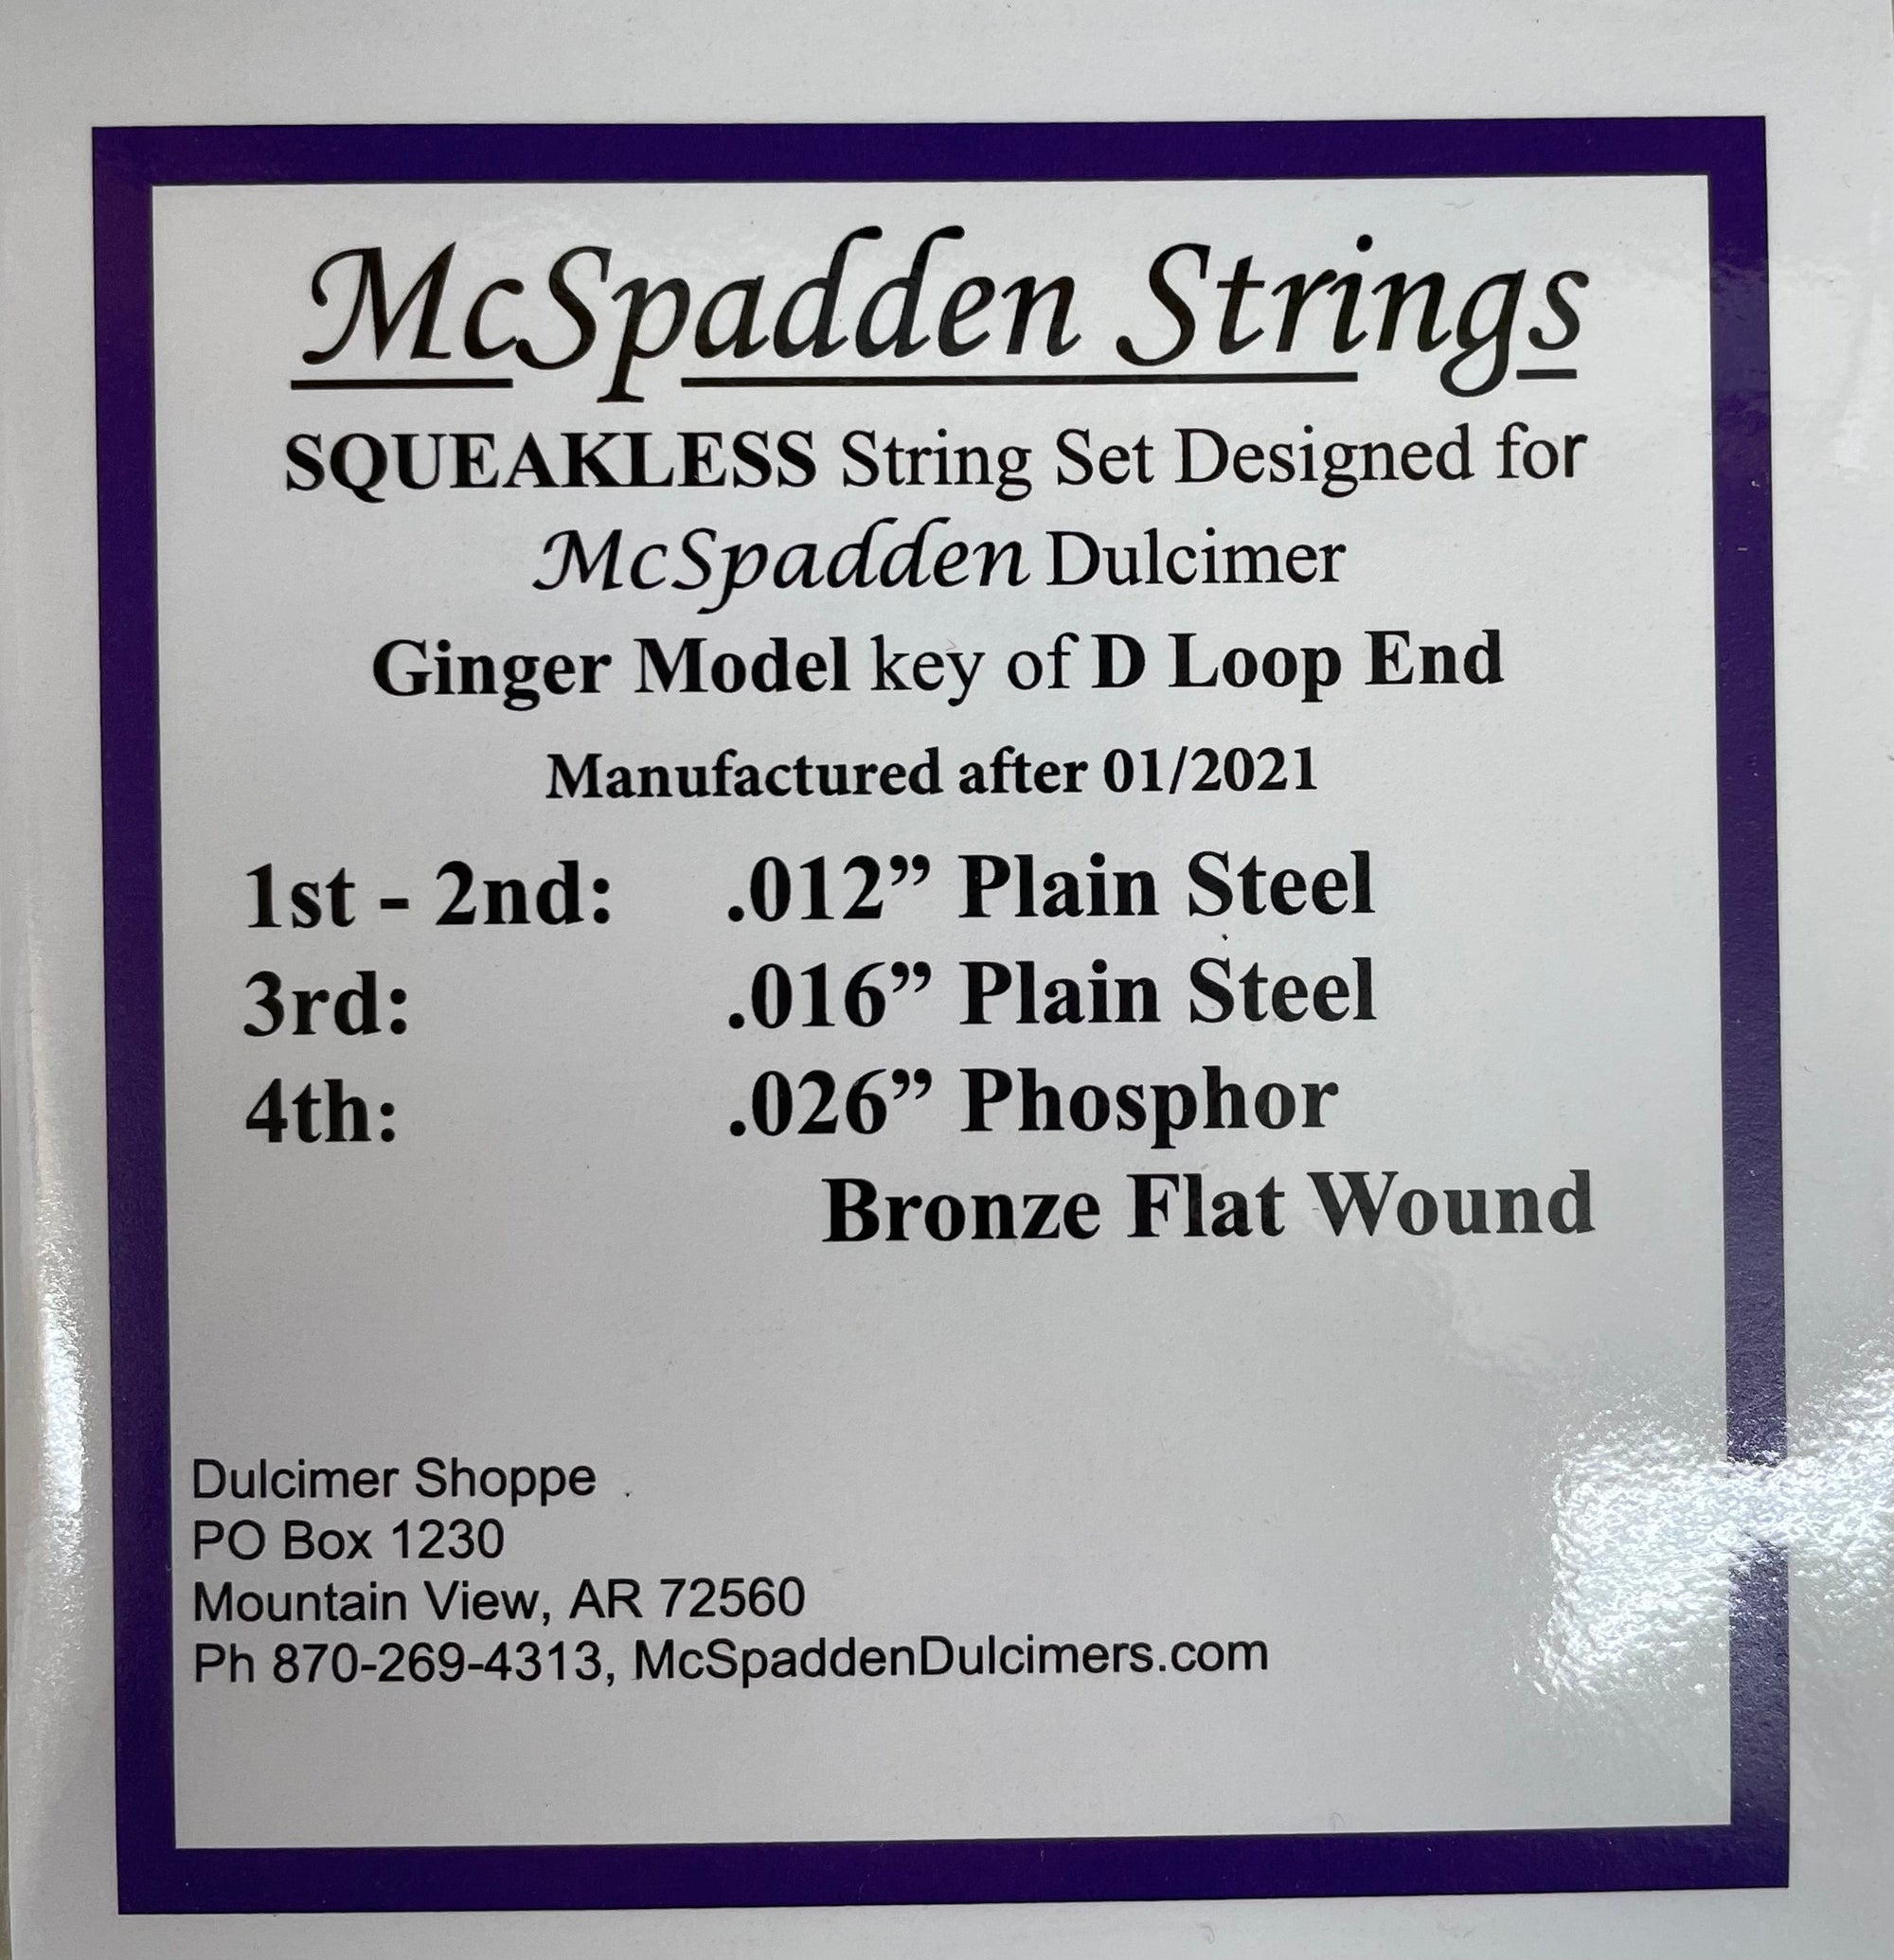 A package of Squeakless String Set for Ginger Dulcimer strings with a Key of D label.